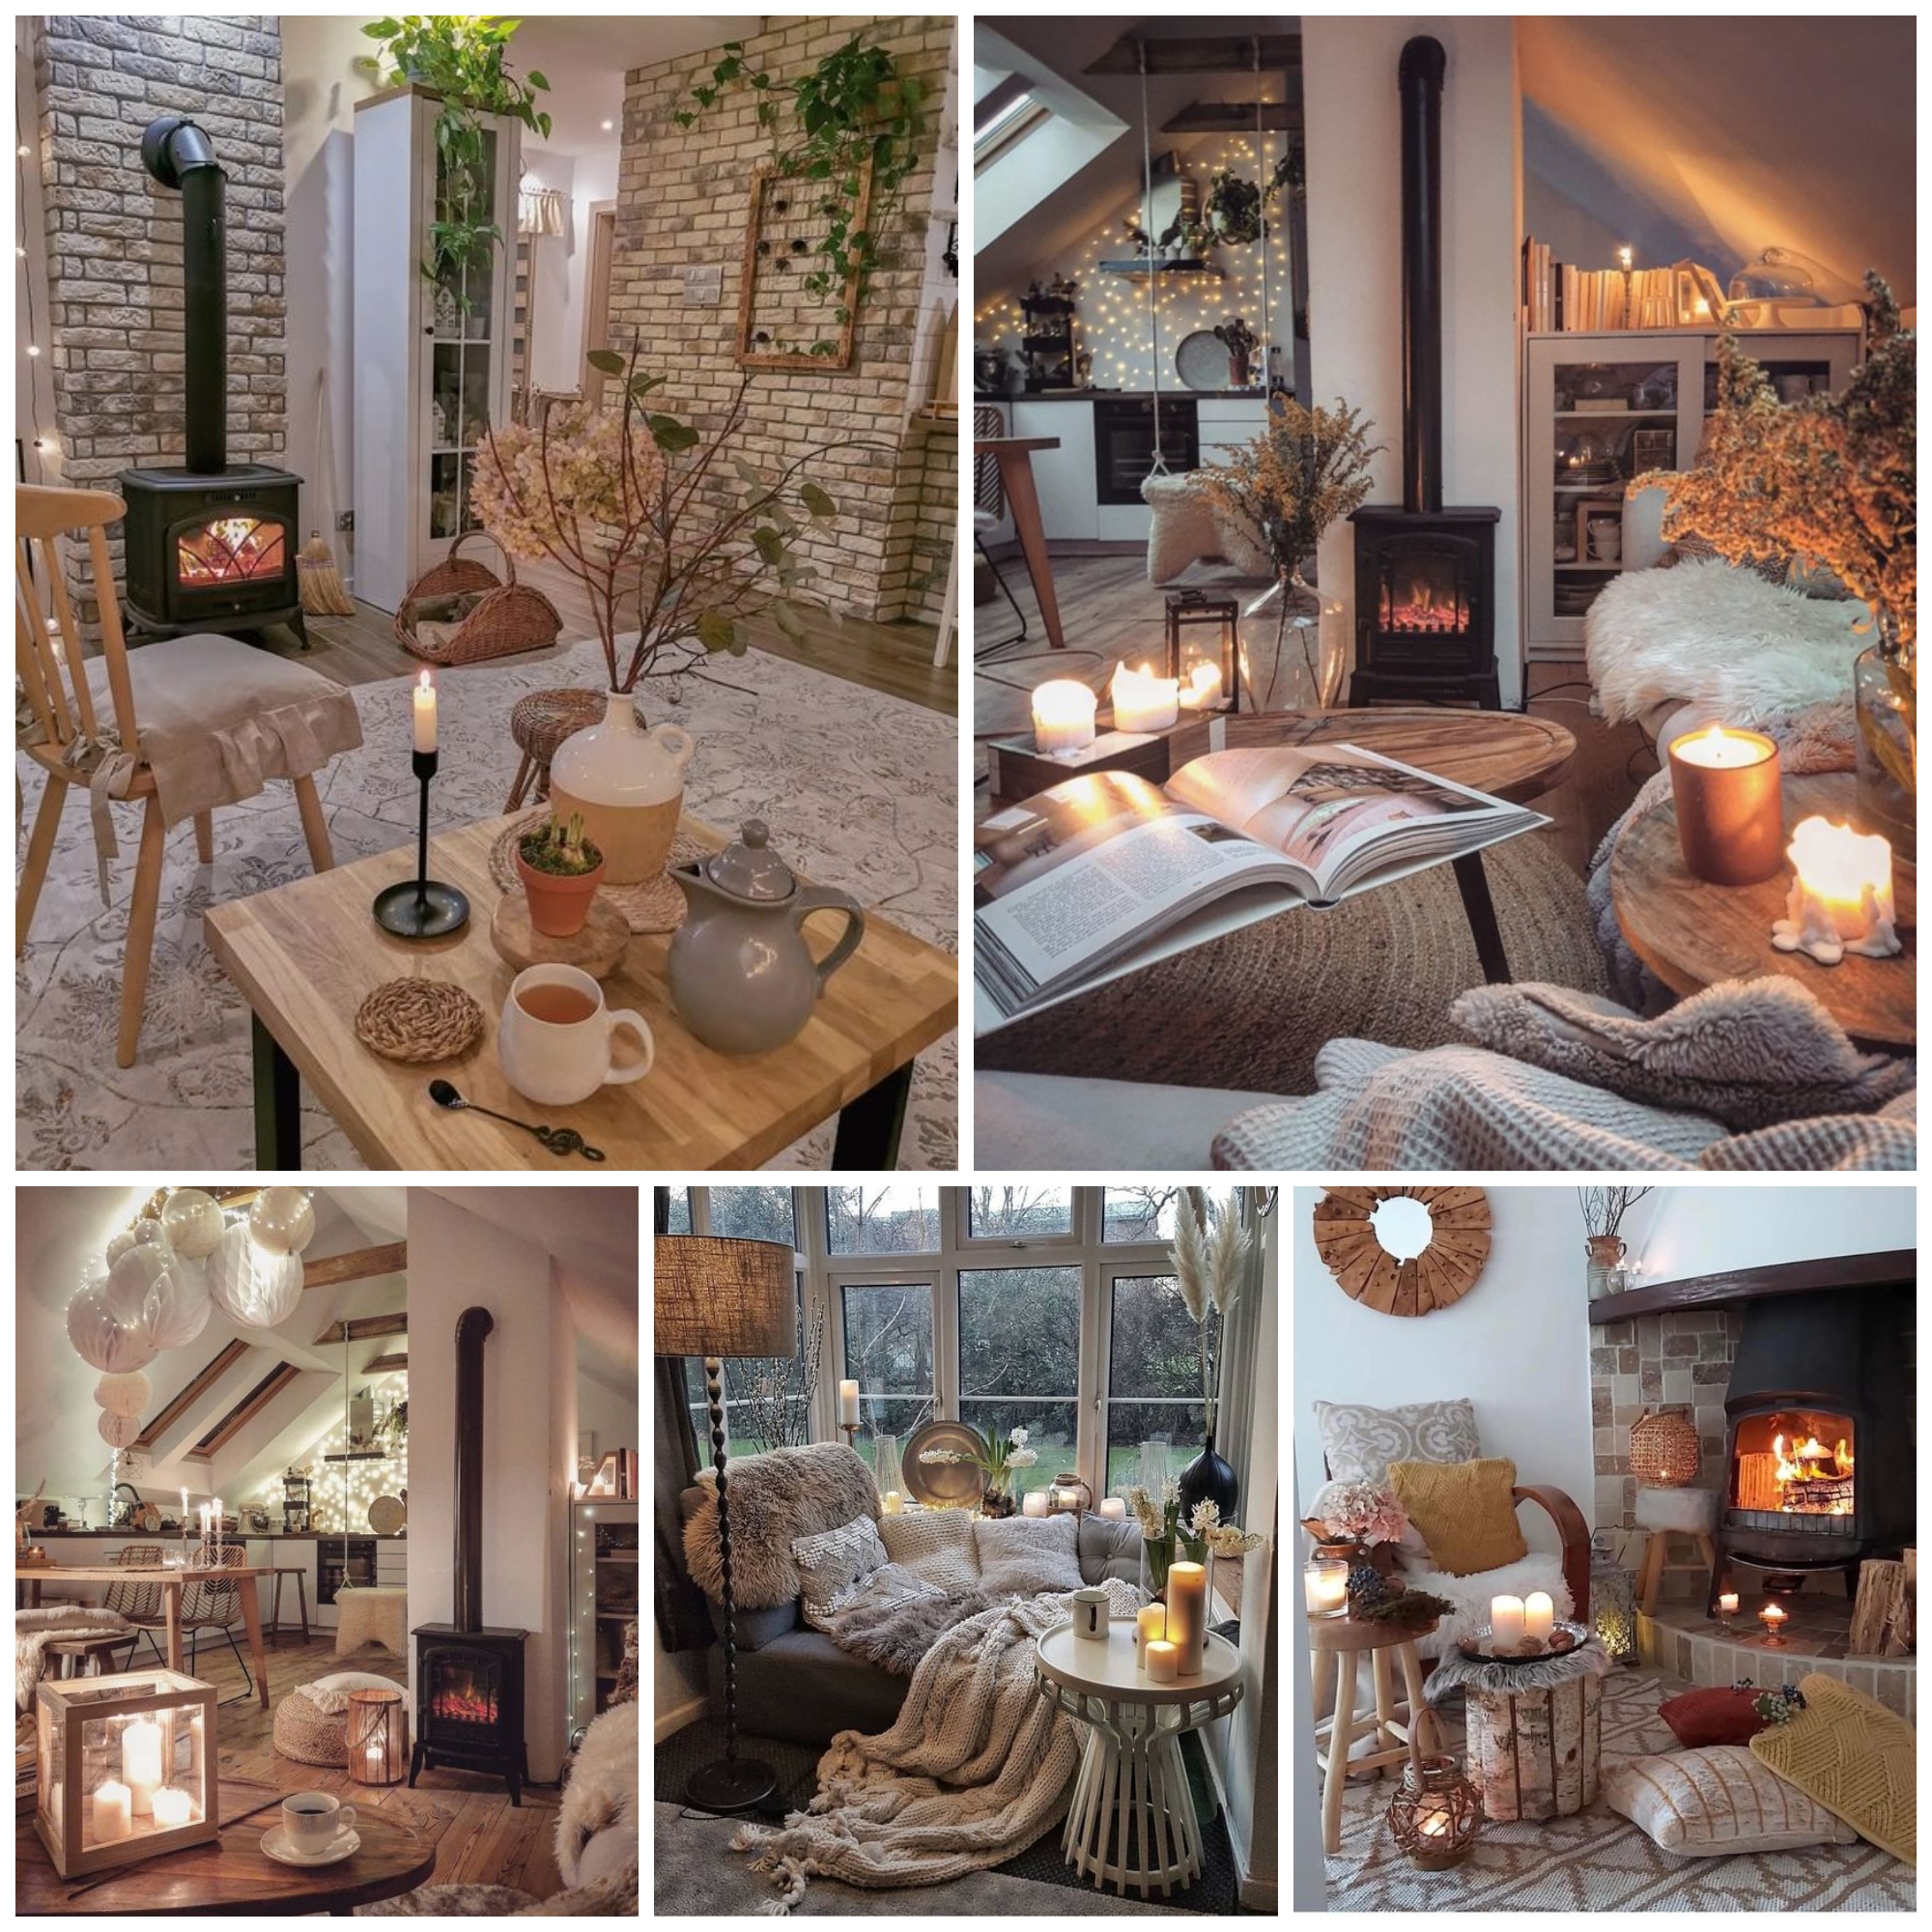 Cozy winter interior design trends for your home